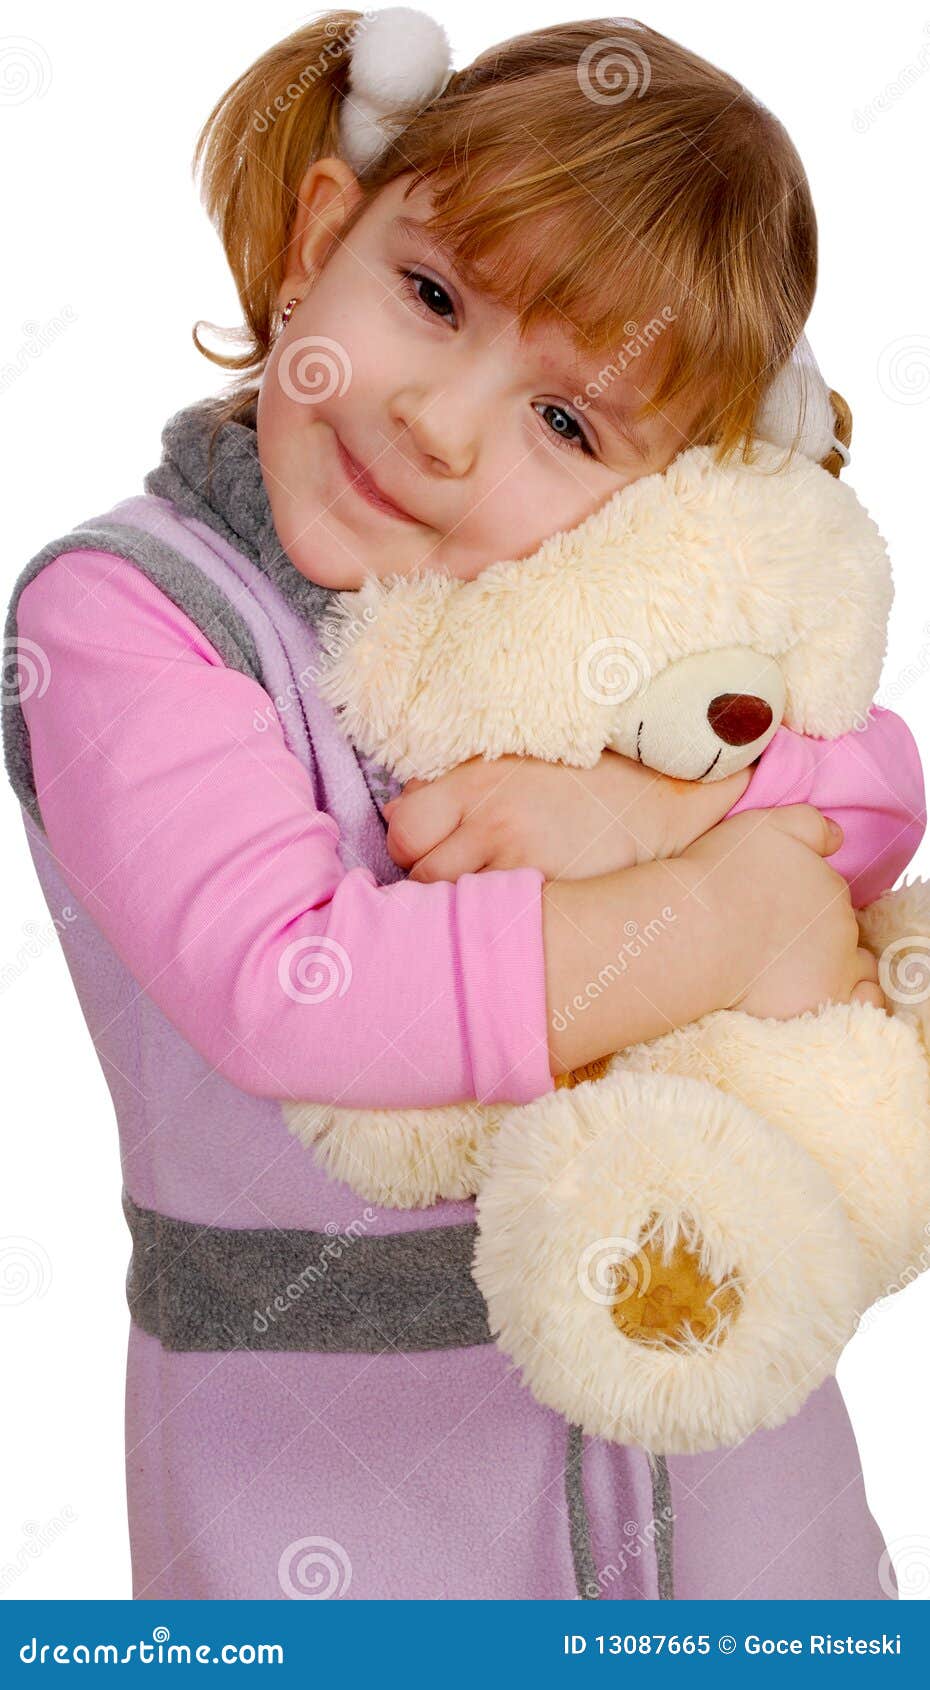 Little Girl with Teddy-bear Stock Image - Image of cuddle, beautiful ...